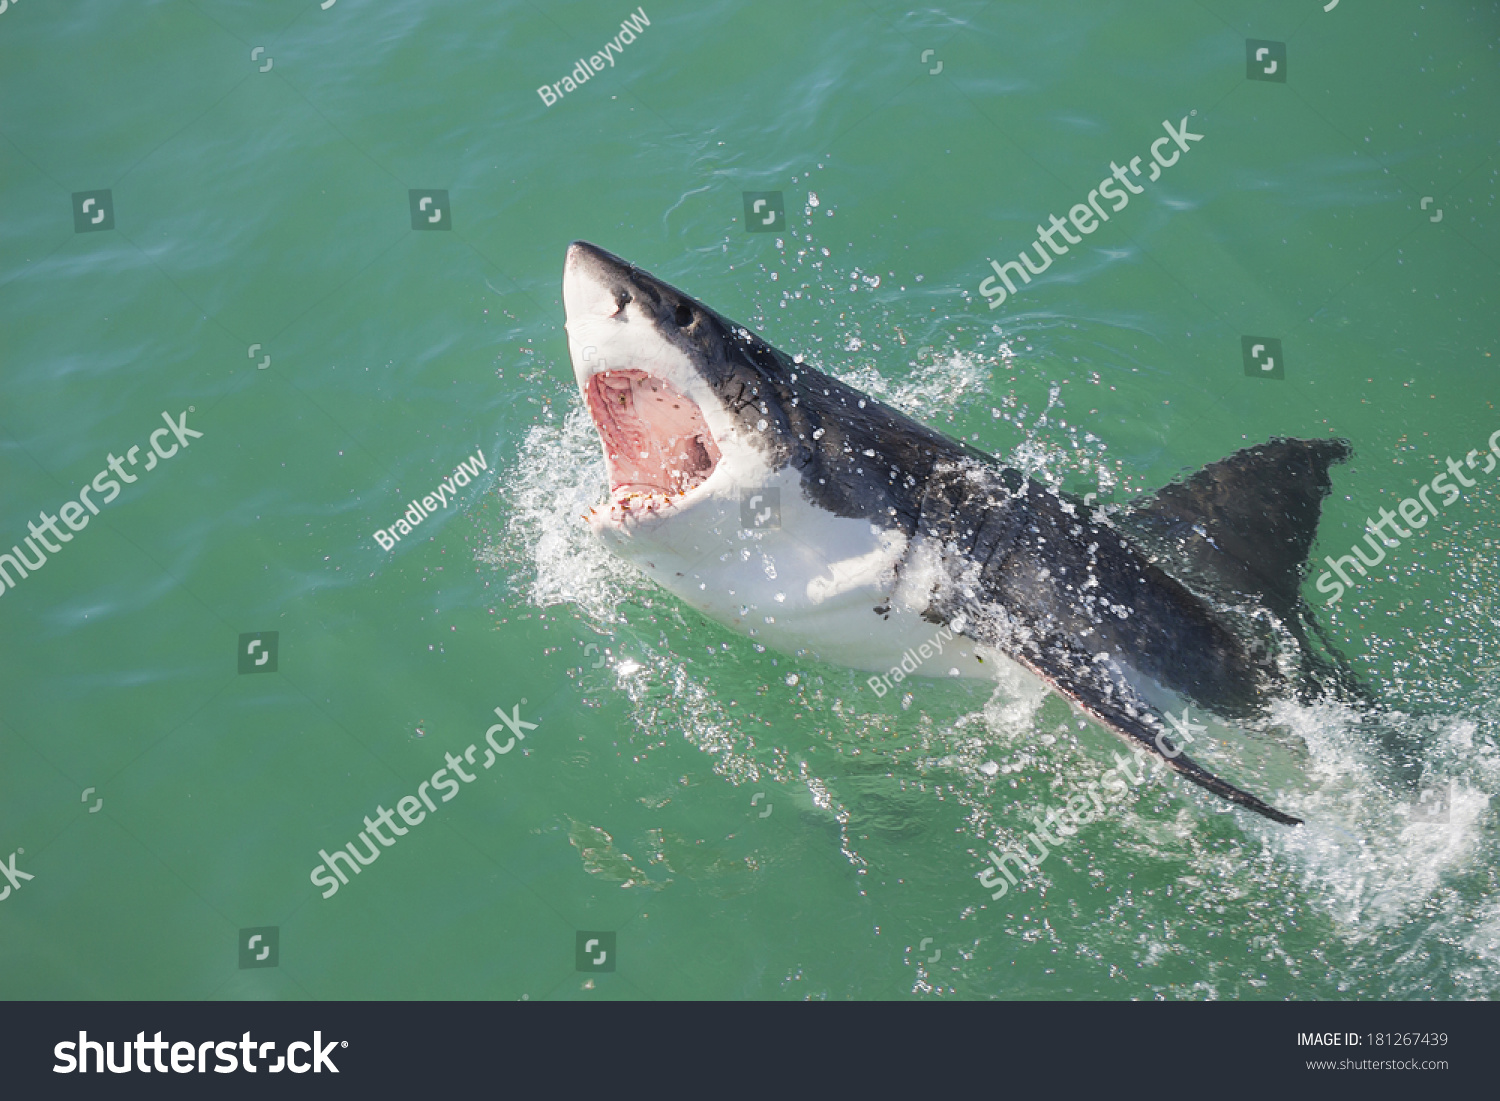 A Great White Shark breaching the water with its mouth open #181267439